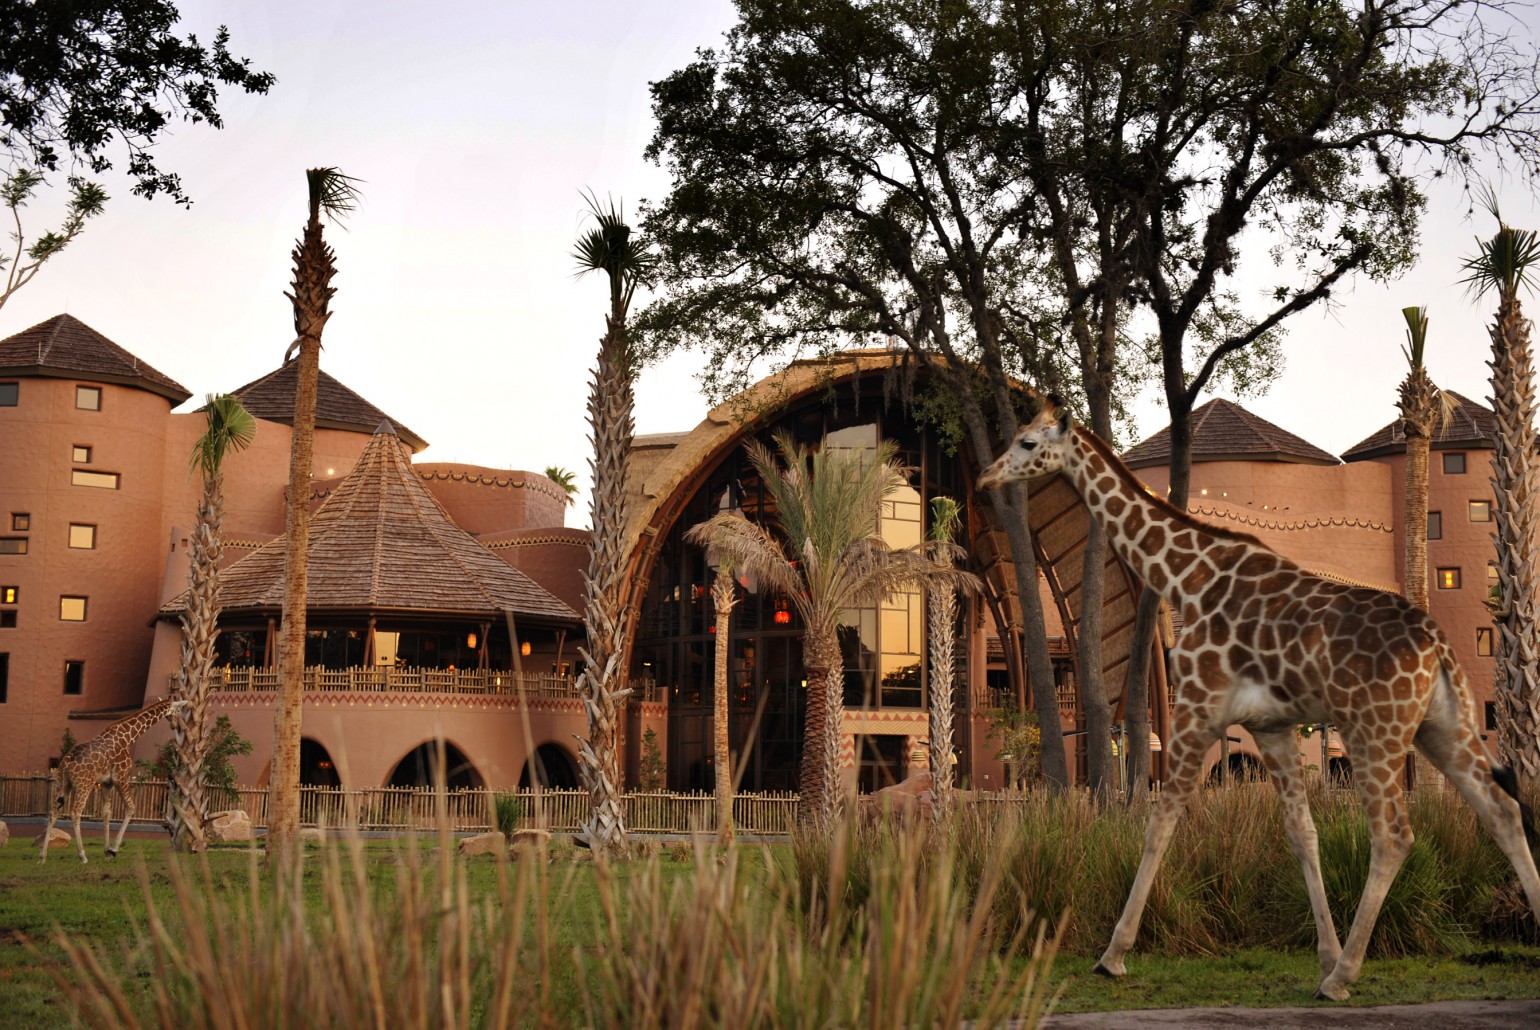 The Ultimate Review of Kidani Village at Walt Disney World featured by top US Disney blogger, Marcie and the Mouse: Kidani Village at Animal Kingdom Lodge at Walt Disney World is one of the coolest hotels at Disney World